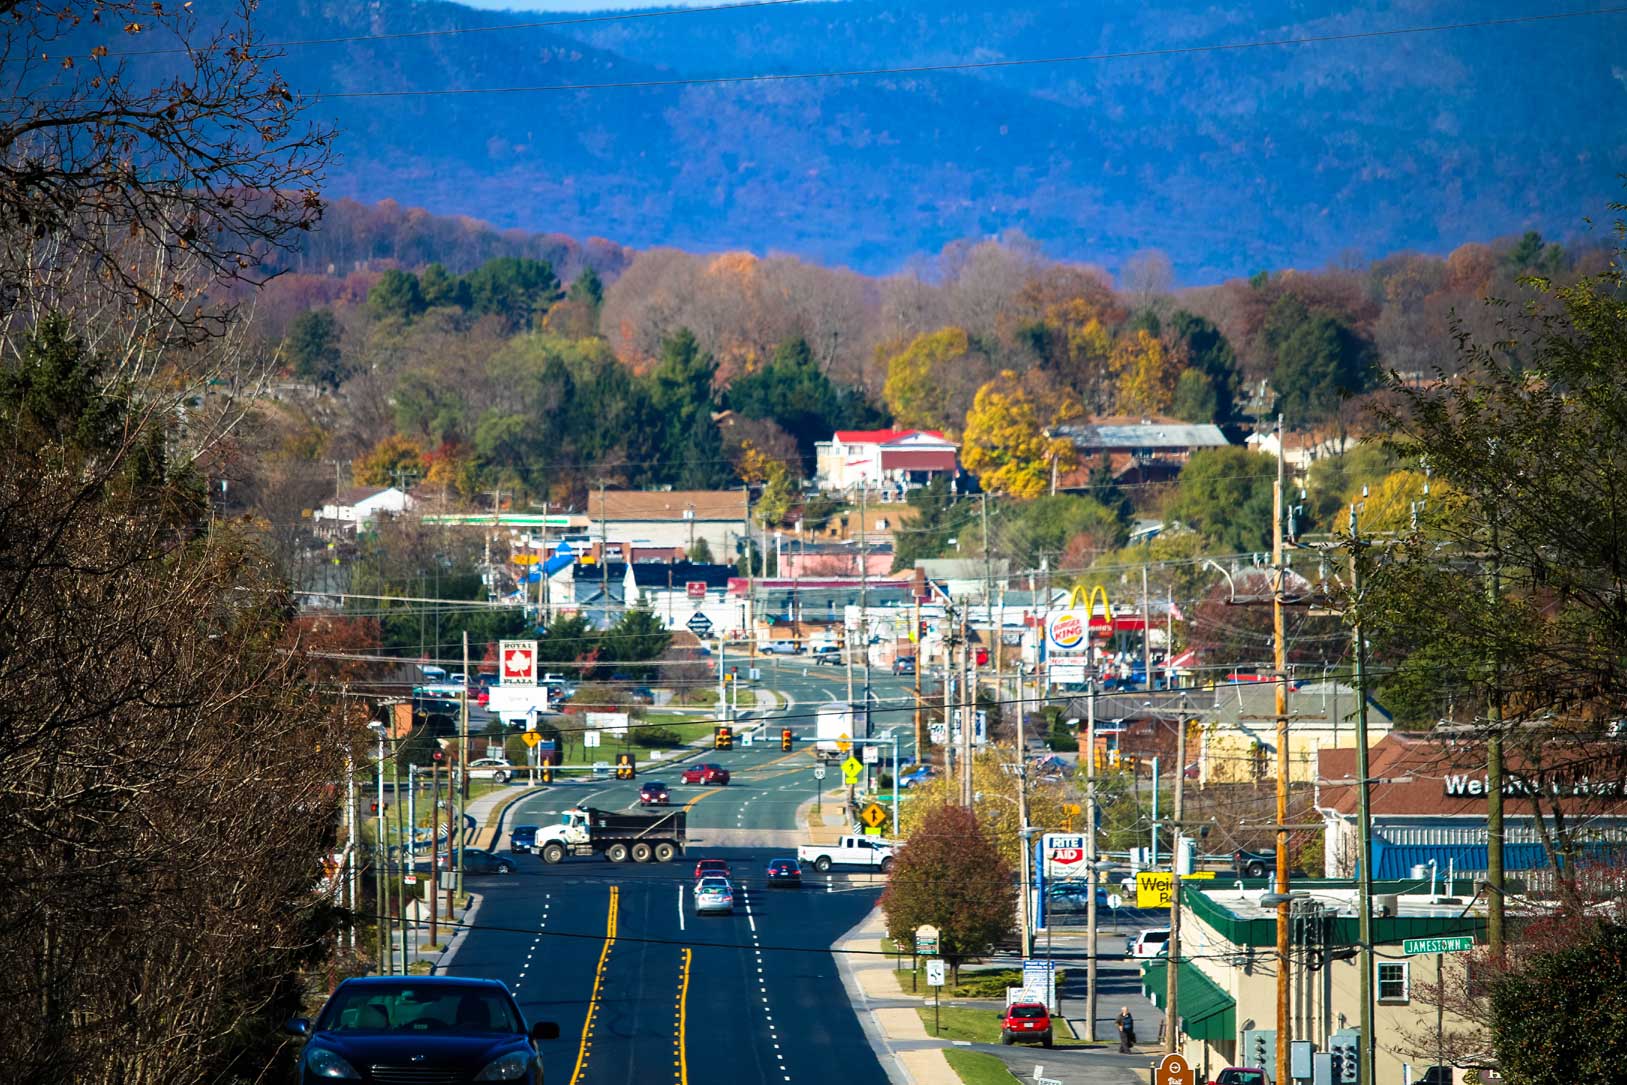 View of the city of Front Royal, VA